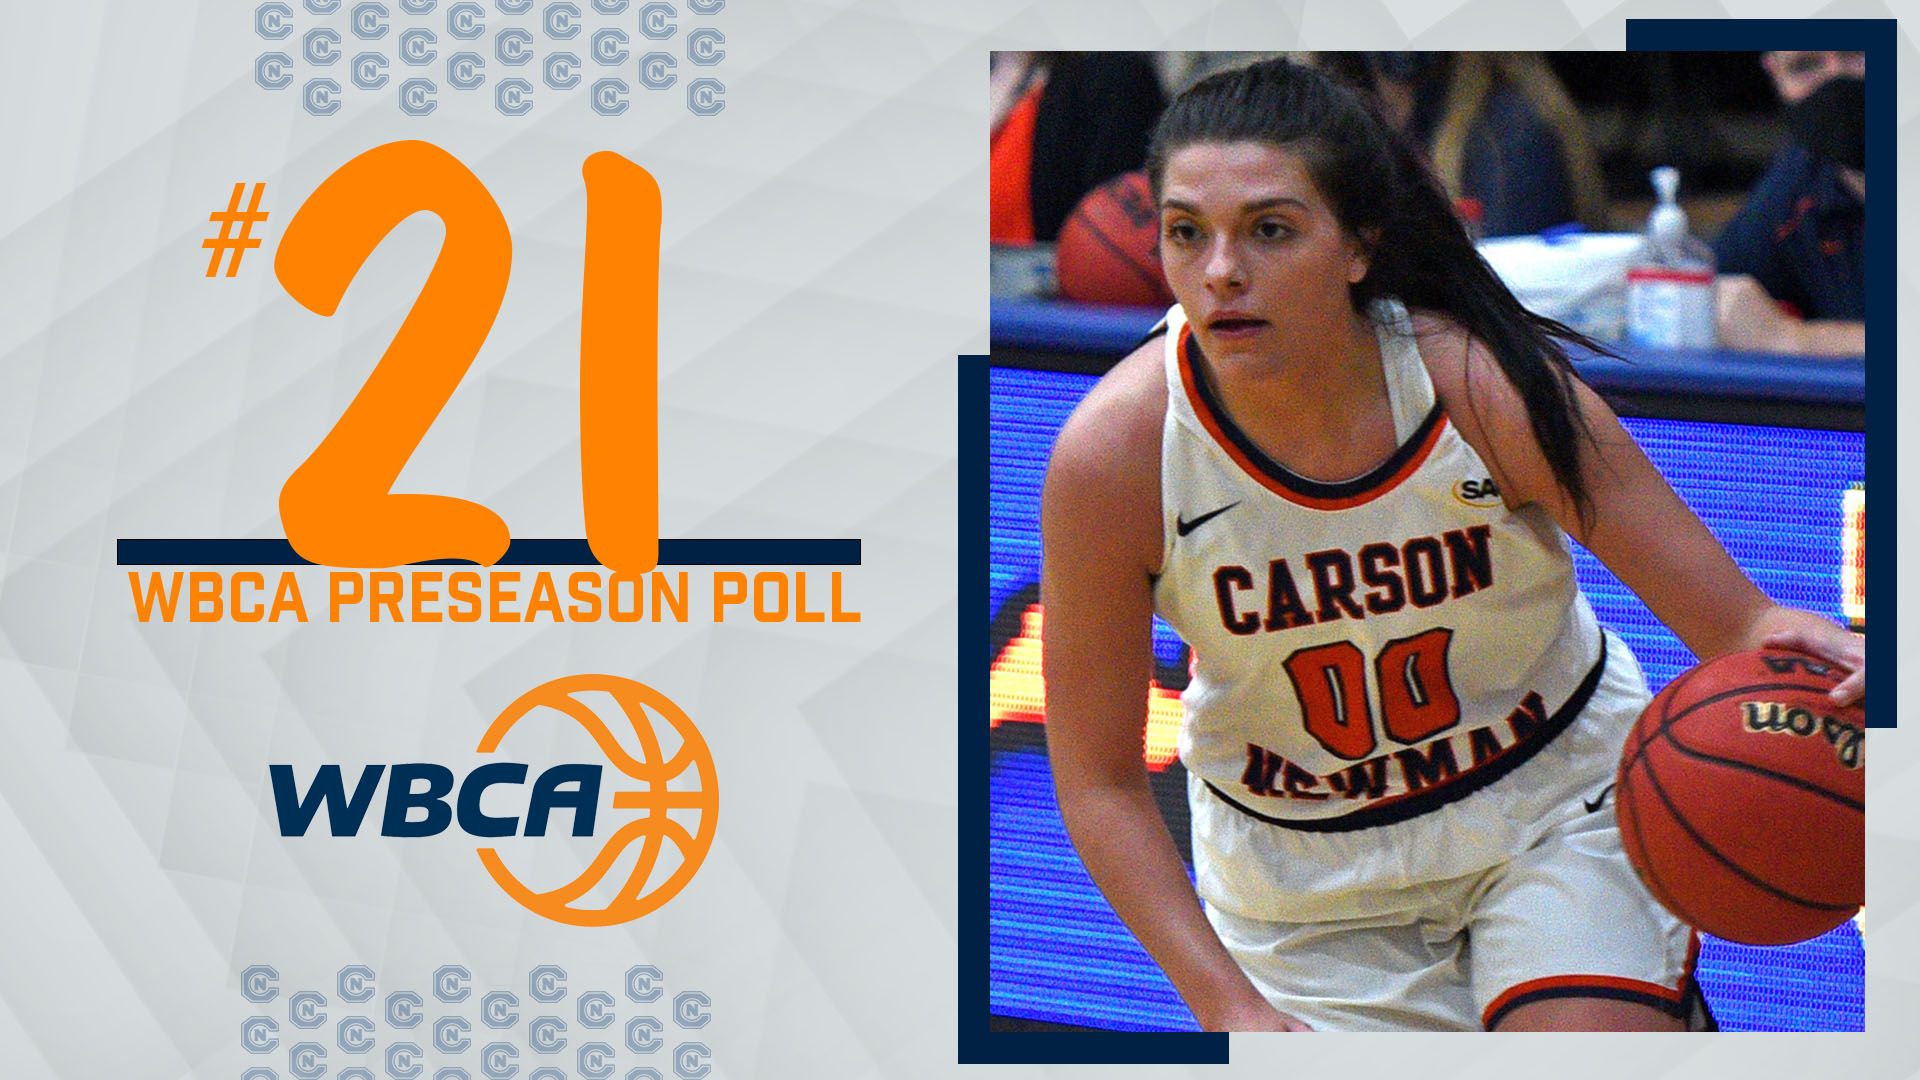 Lady Eagles open the year at No. 21 in WBCA poll